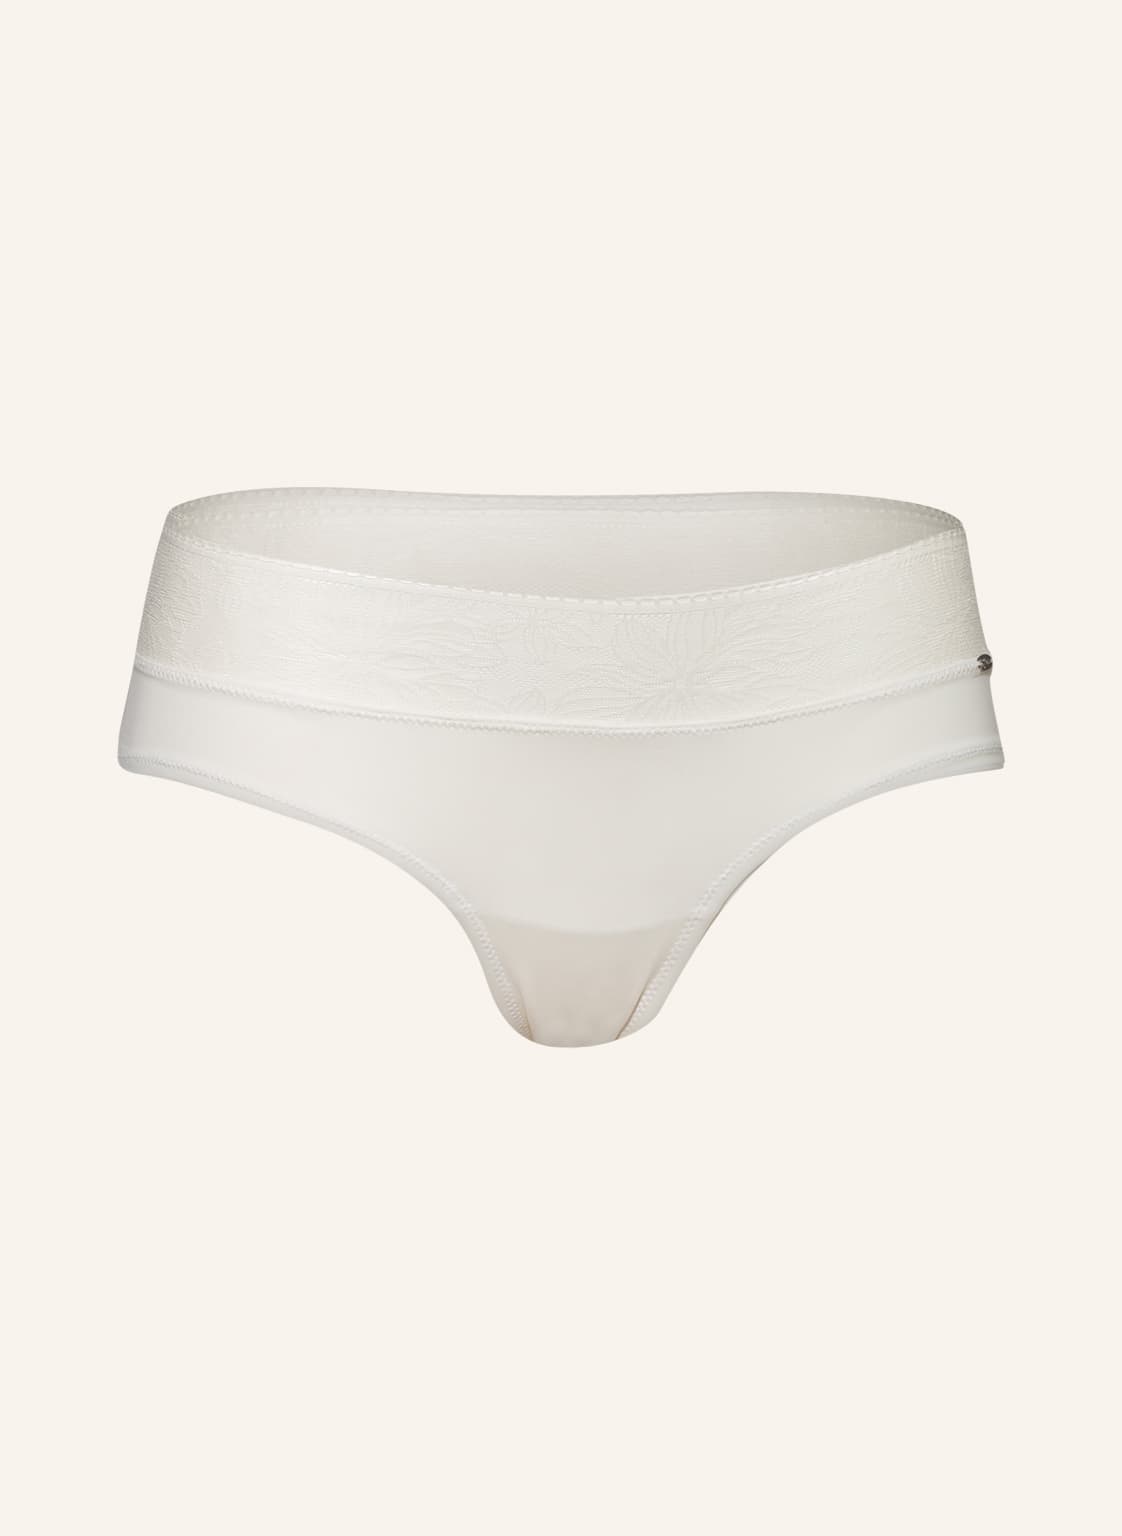 Skiny Panty Every Day In Micro Lace beige von SKINY